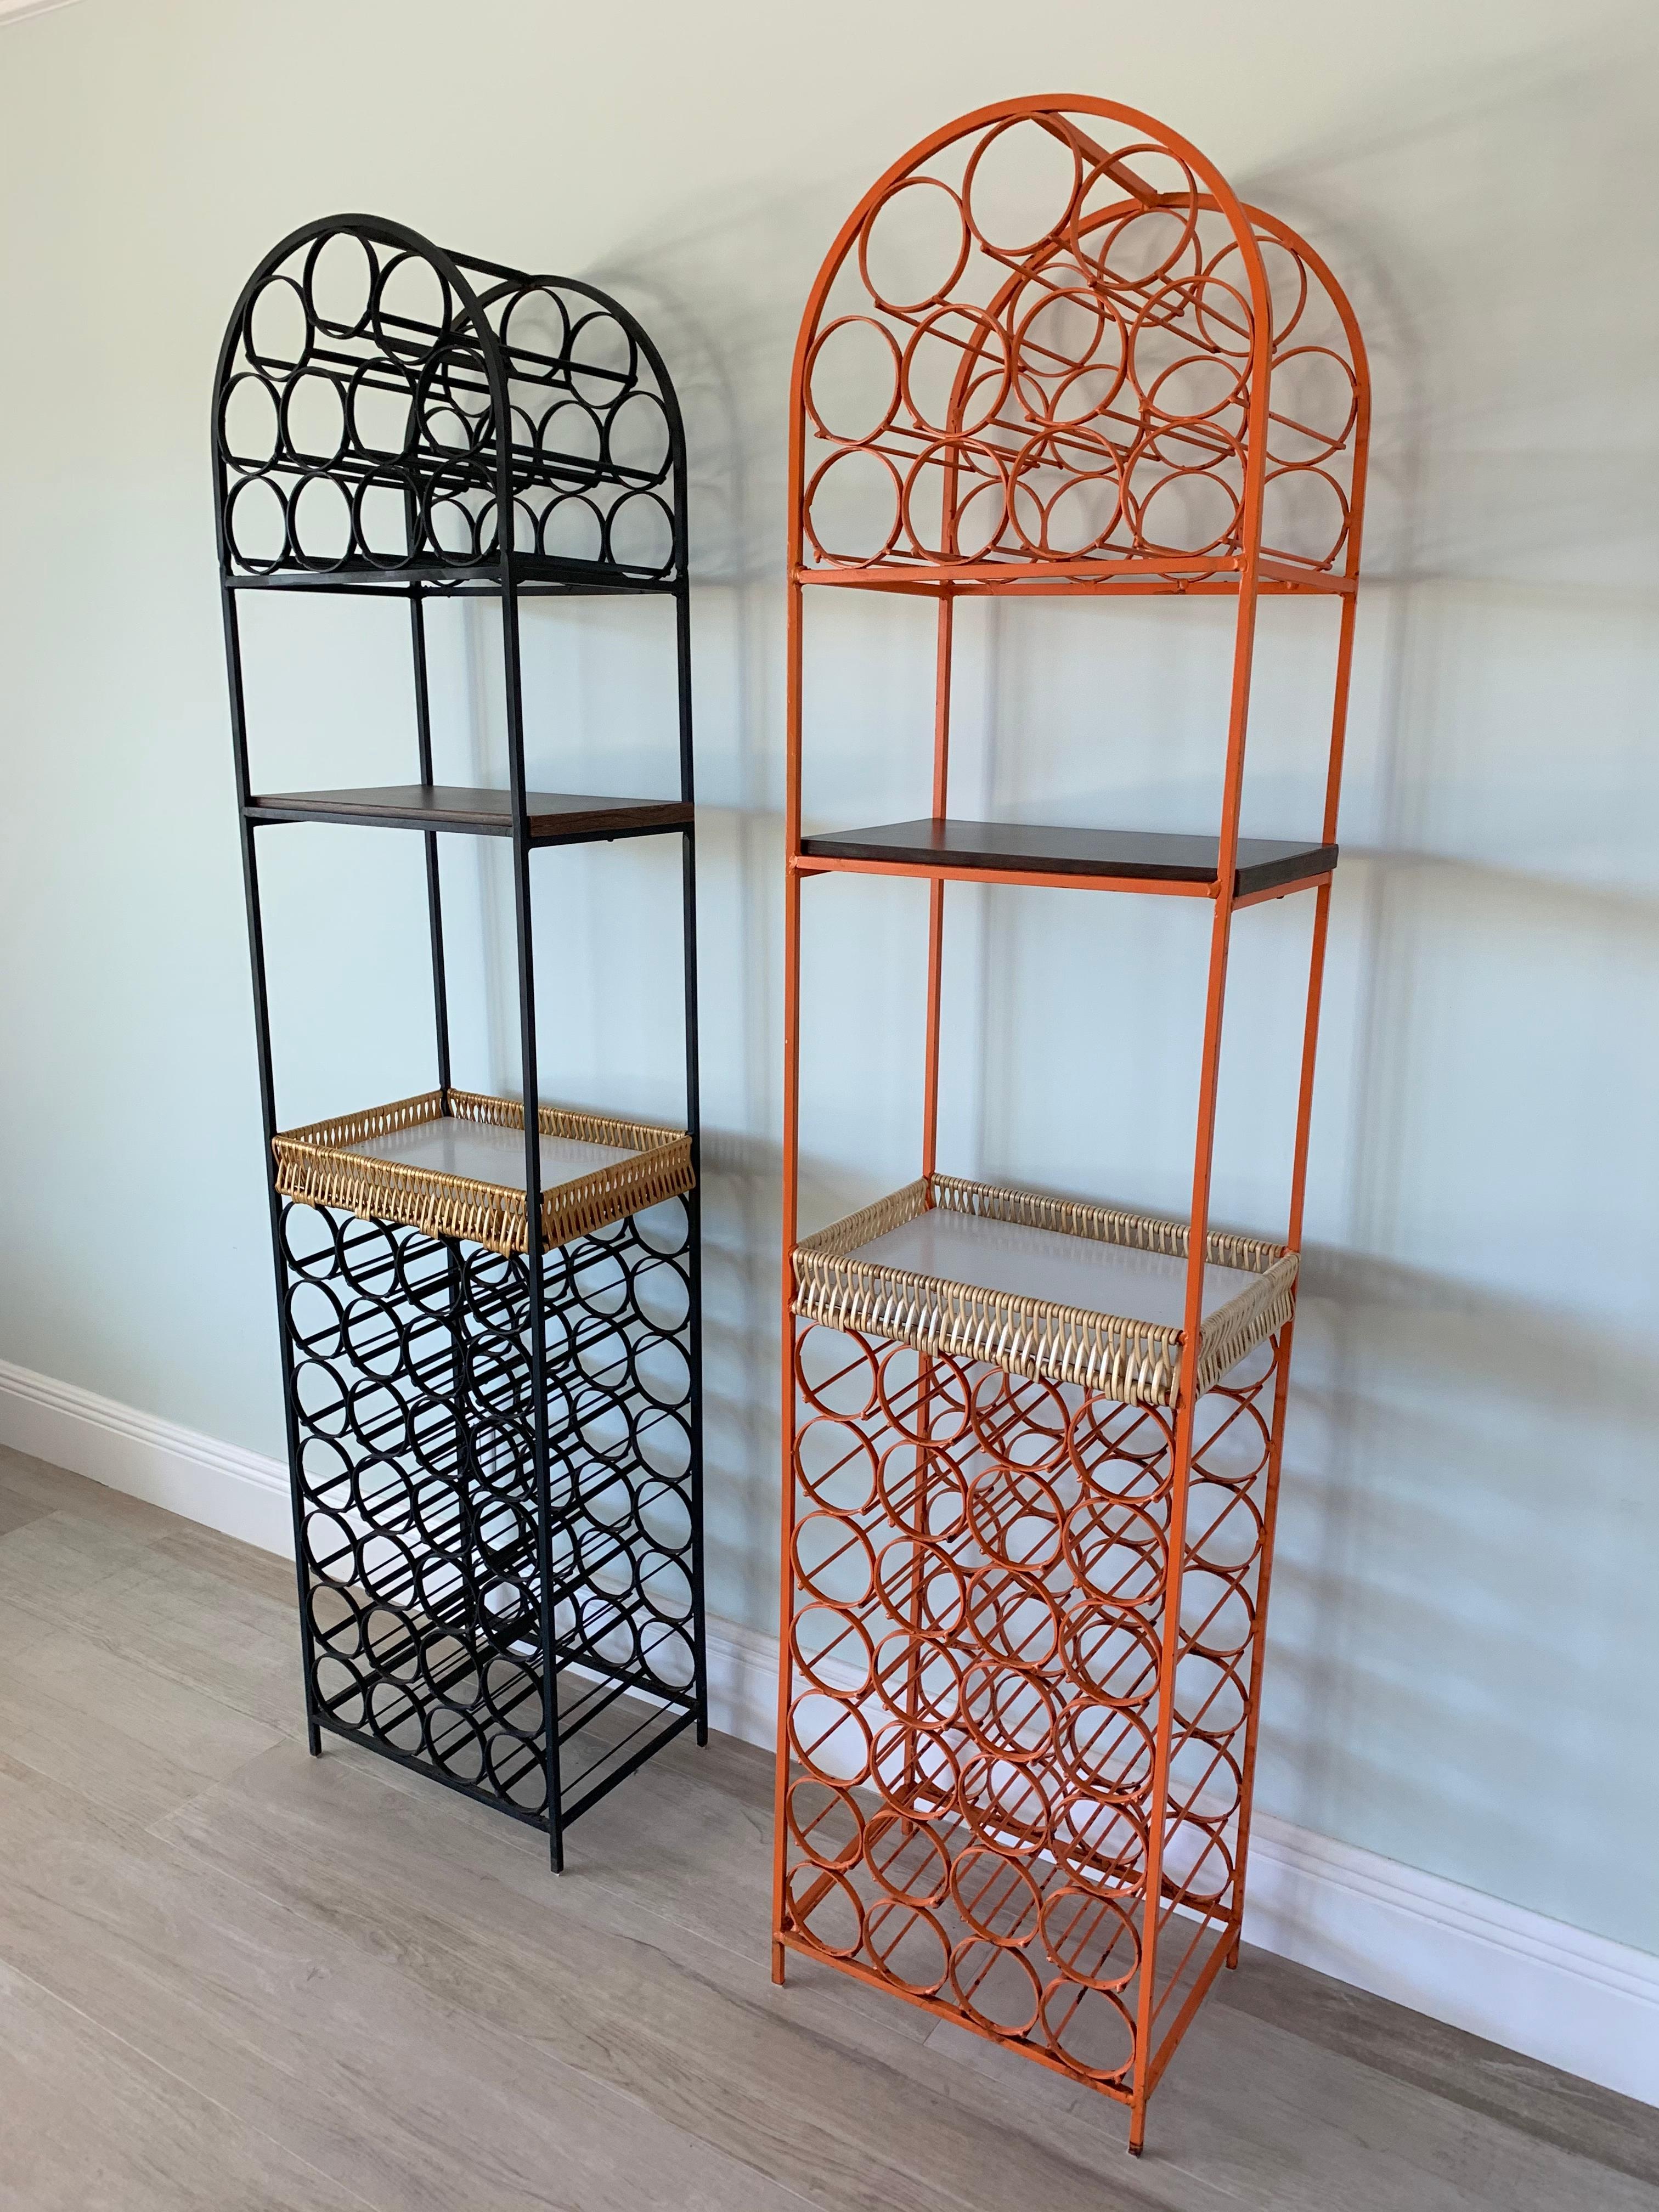 Set of two wrought iron wine racks by Arthur Umanoff.
Rare orange and black lacquered metal. Original lacquer on both.
Each racks can hold up to 39 bottles and include a woven basket type shelf and a laminated shelf to hold glasses, serve drinks